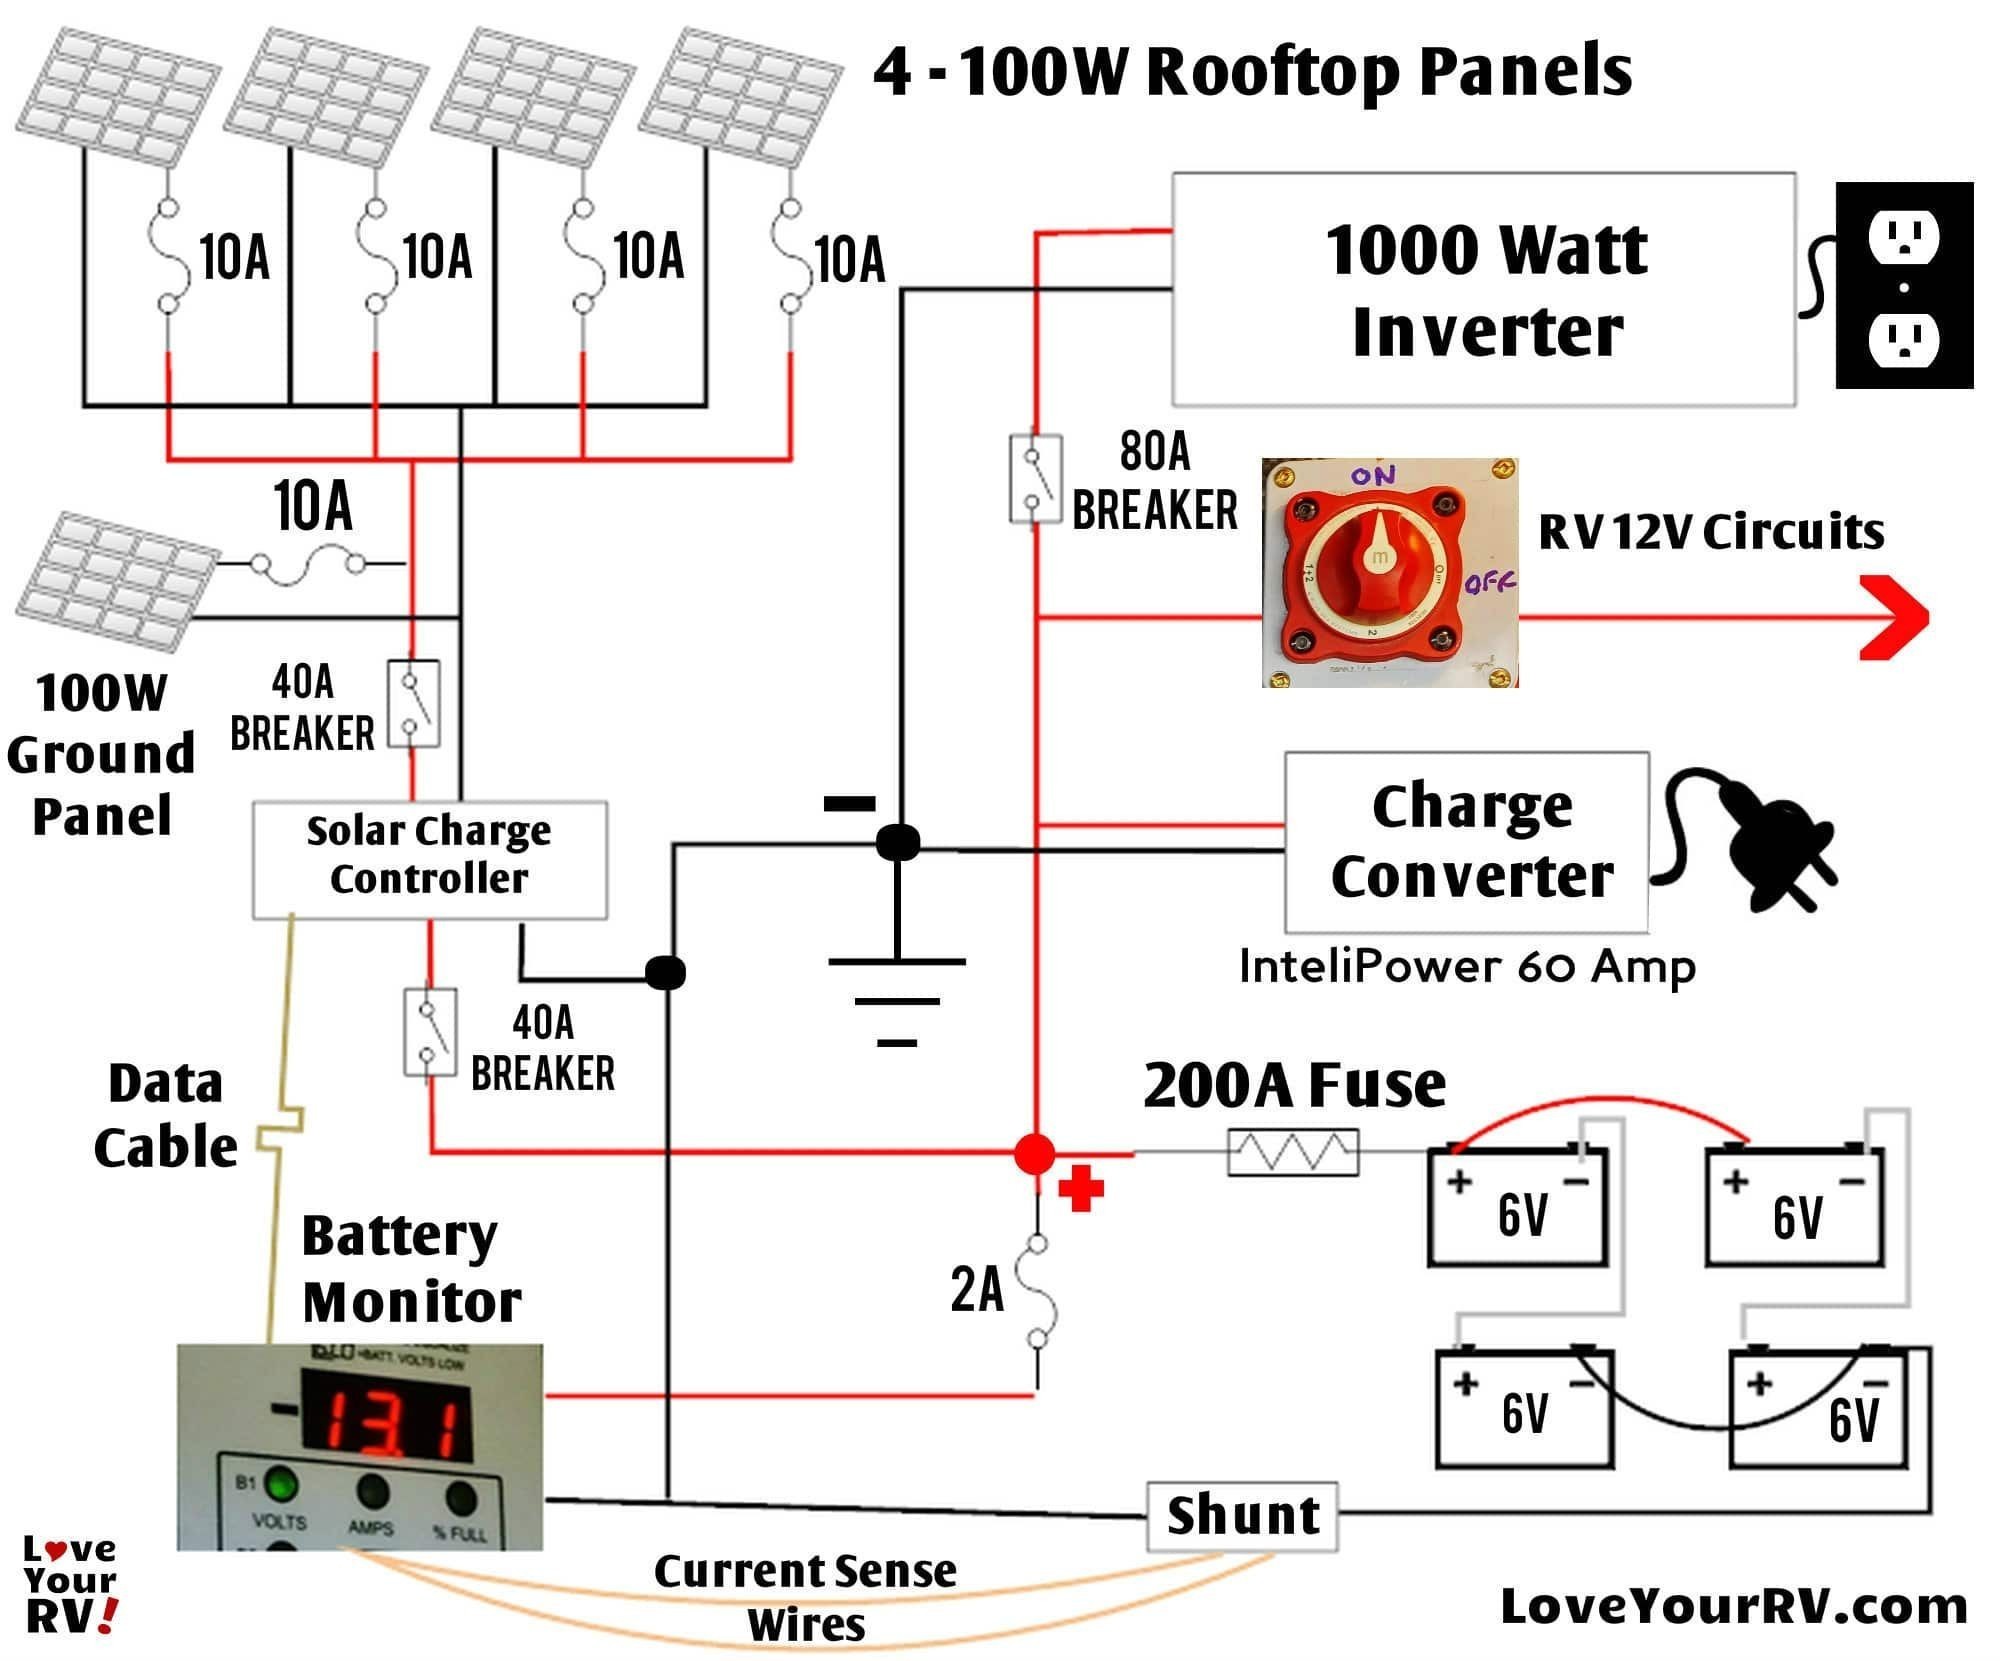 Solar Panel Wiring Diagram Example Save Rv solar Wiring Diagram Detailed Look at Our Diy Rv